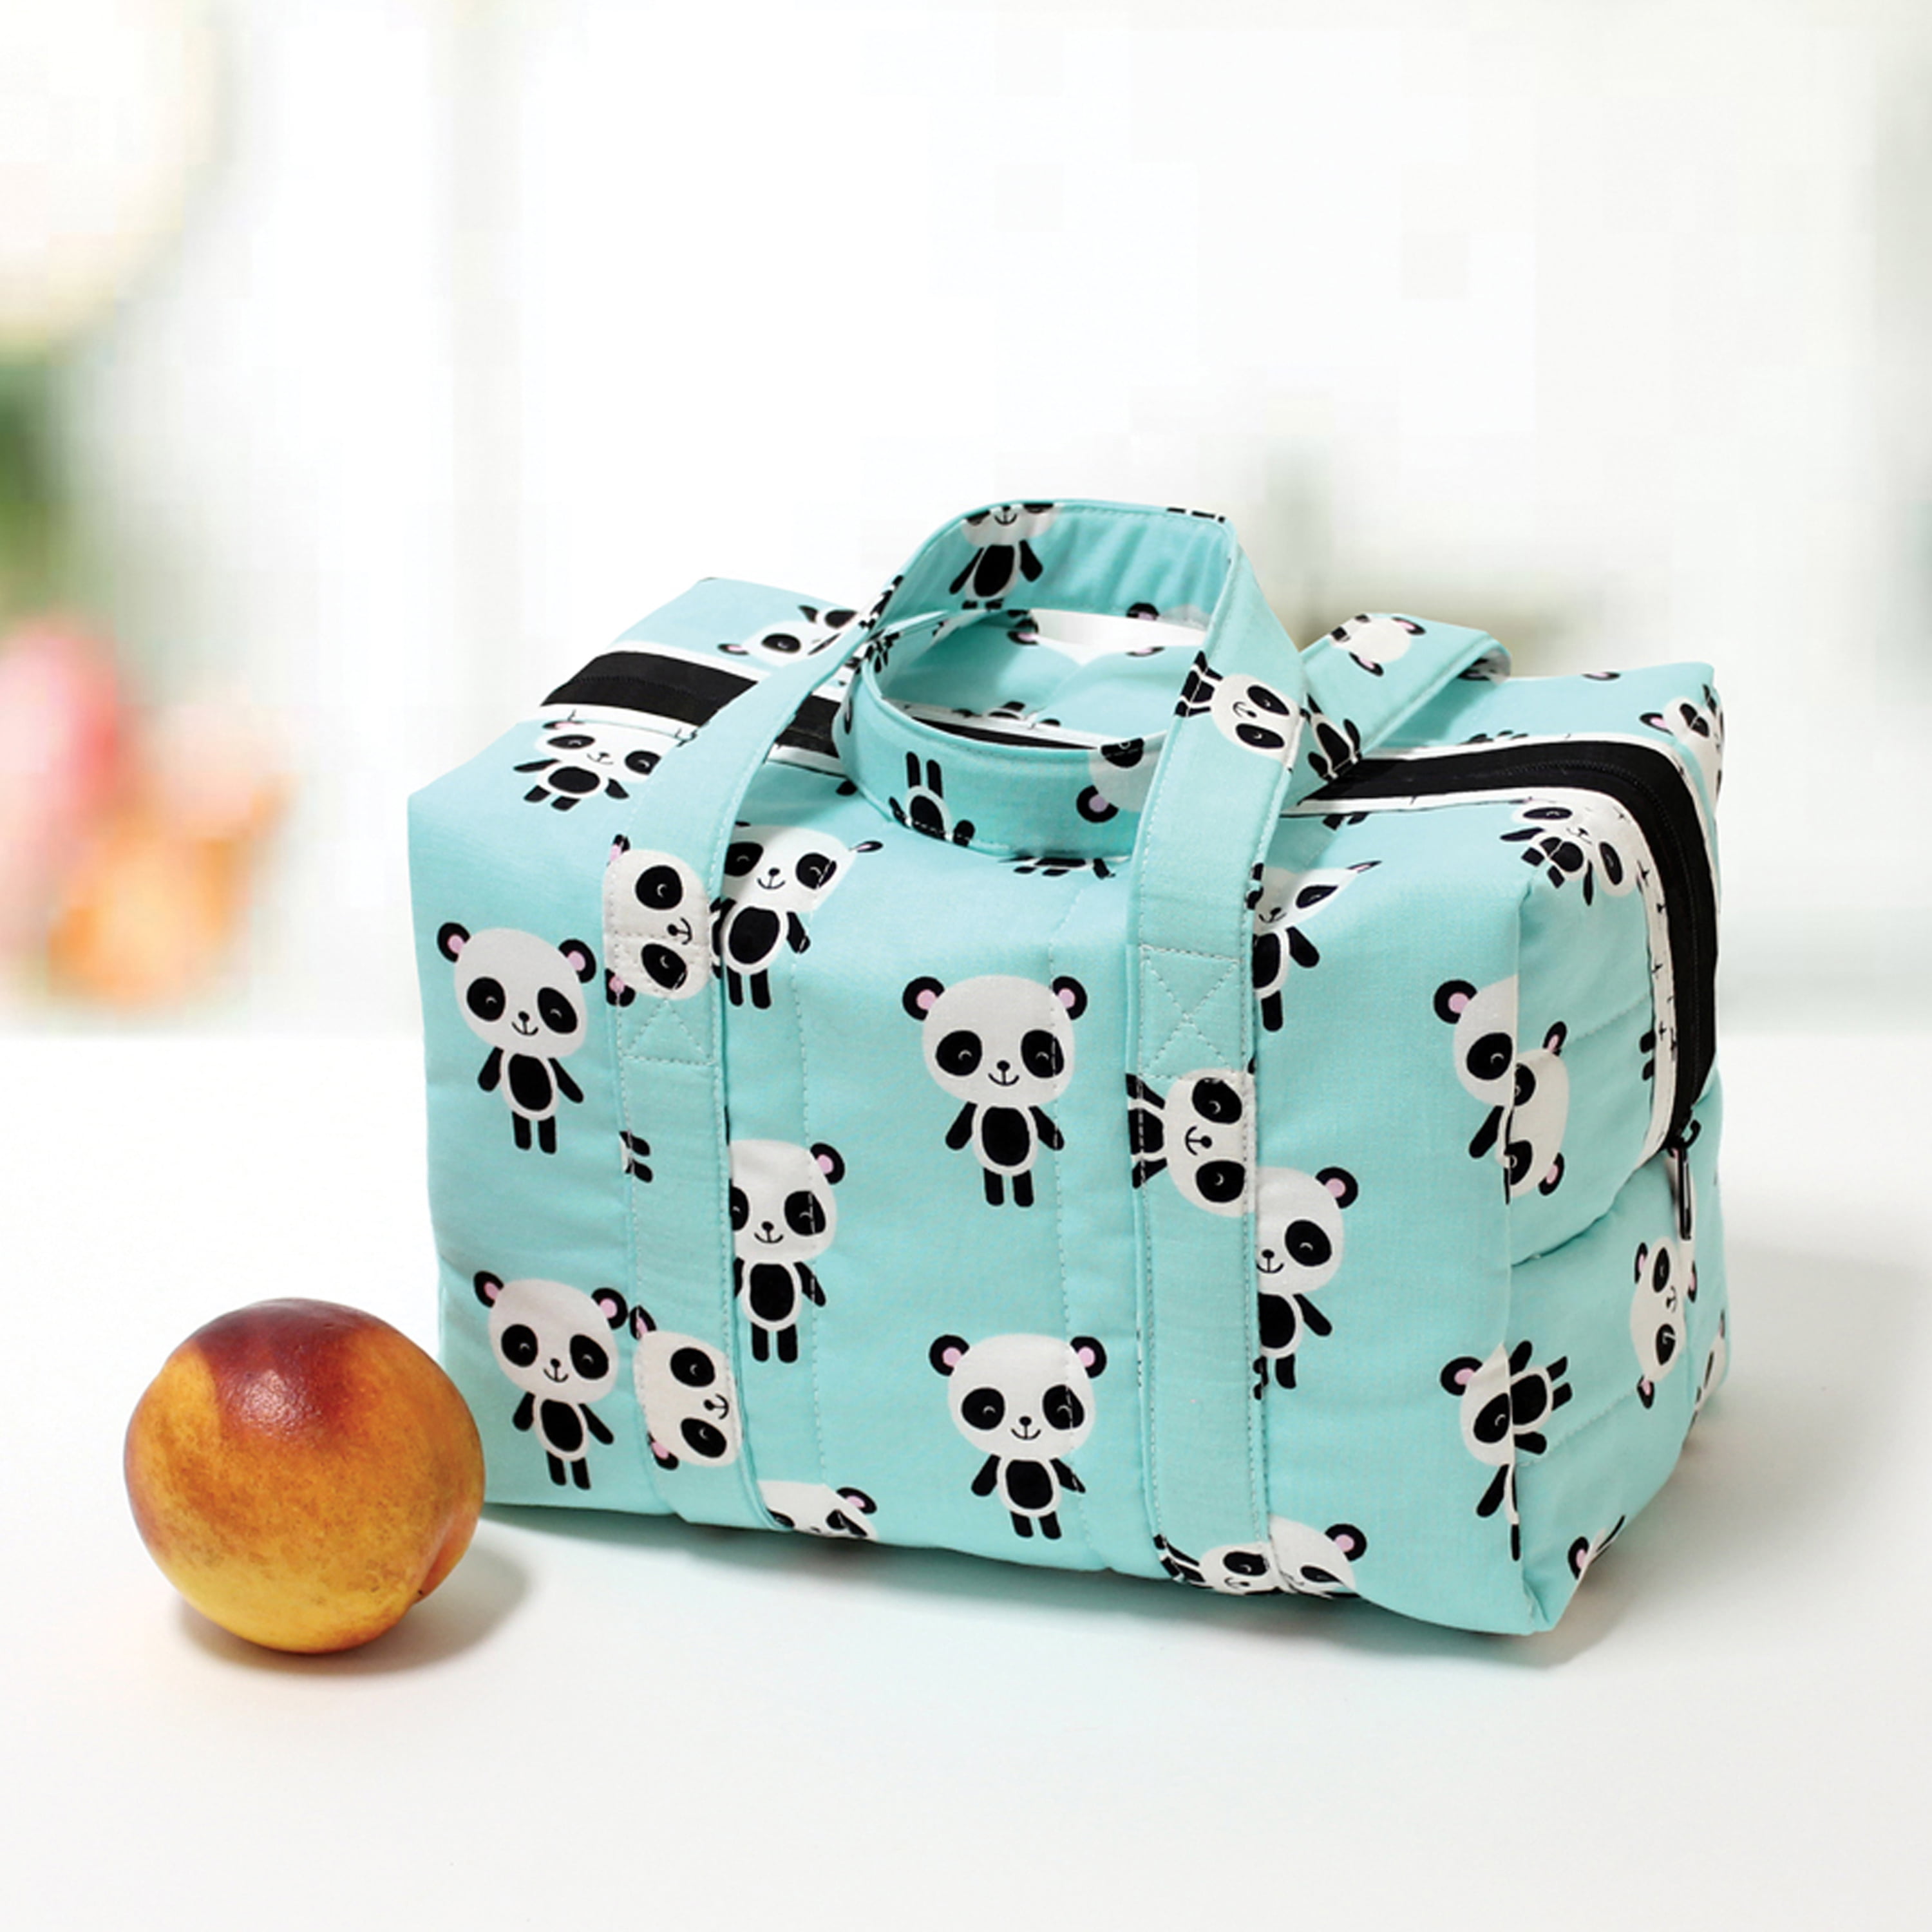 June Tailor Insulated Lunchbox Tote Kit - White Zippity - Do - Done